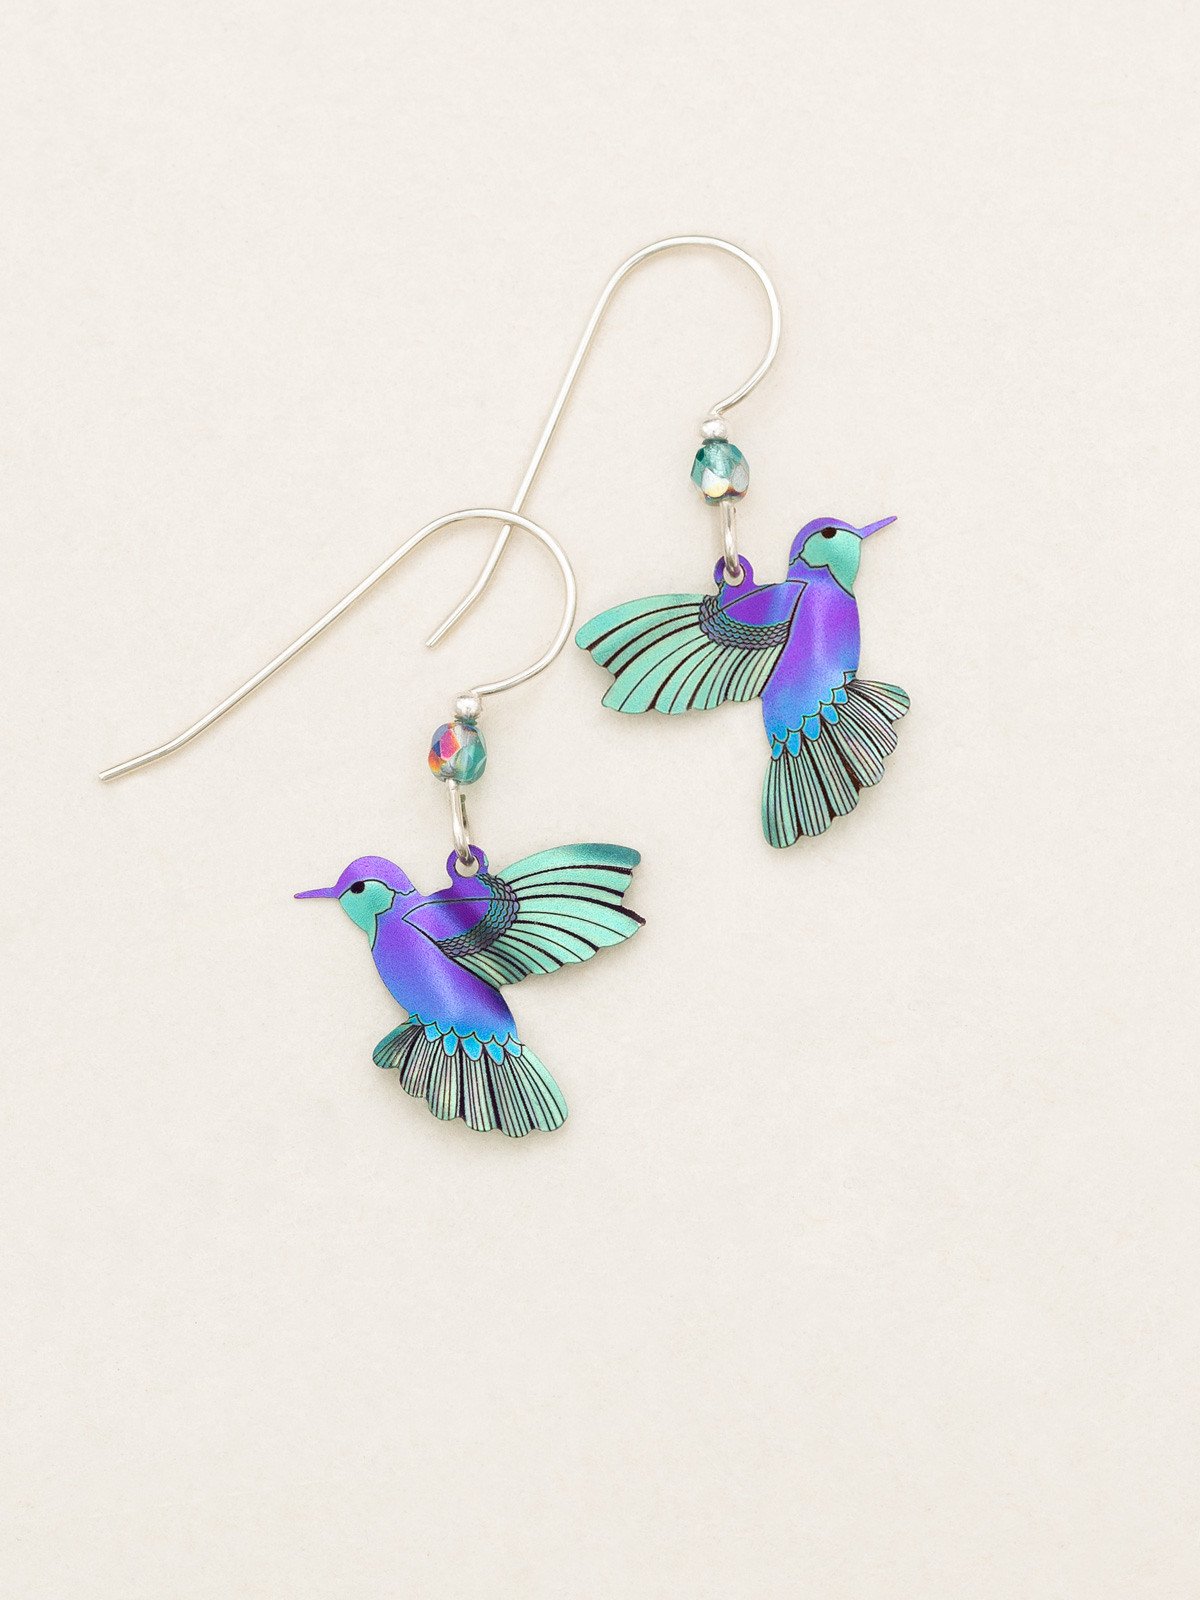 teal and purple hummingbird earrings by Holly Yashi Jewelry